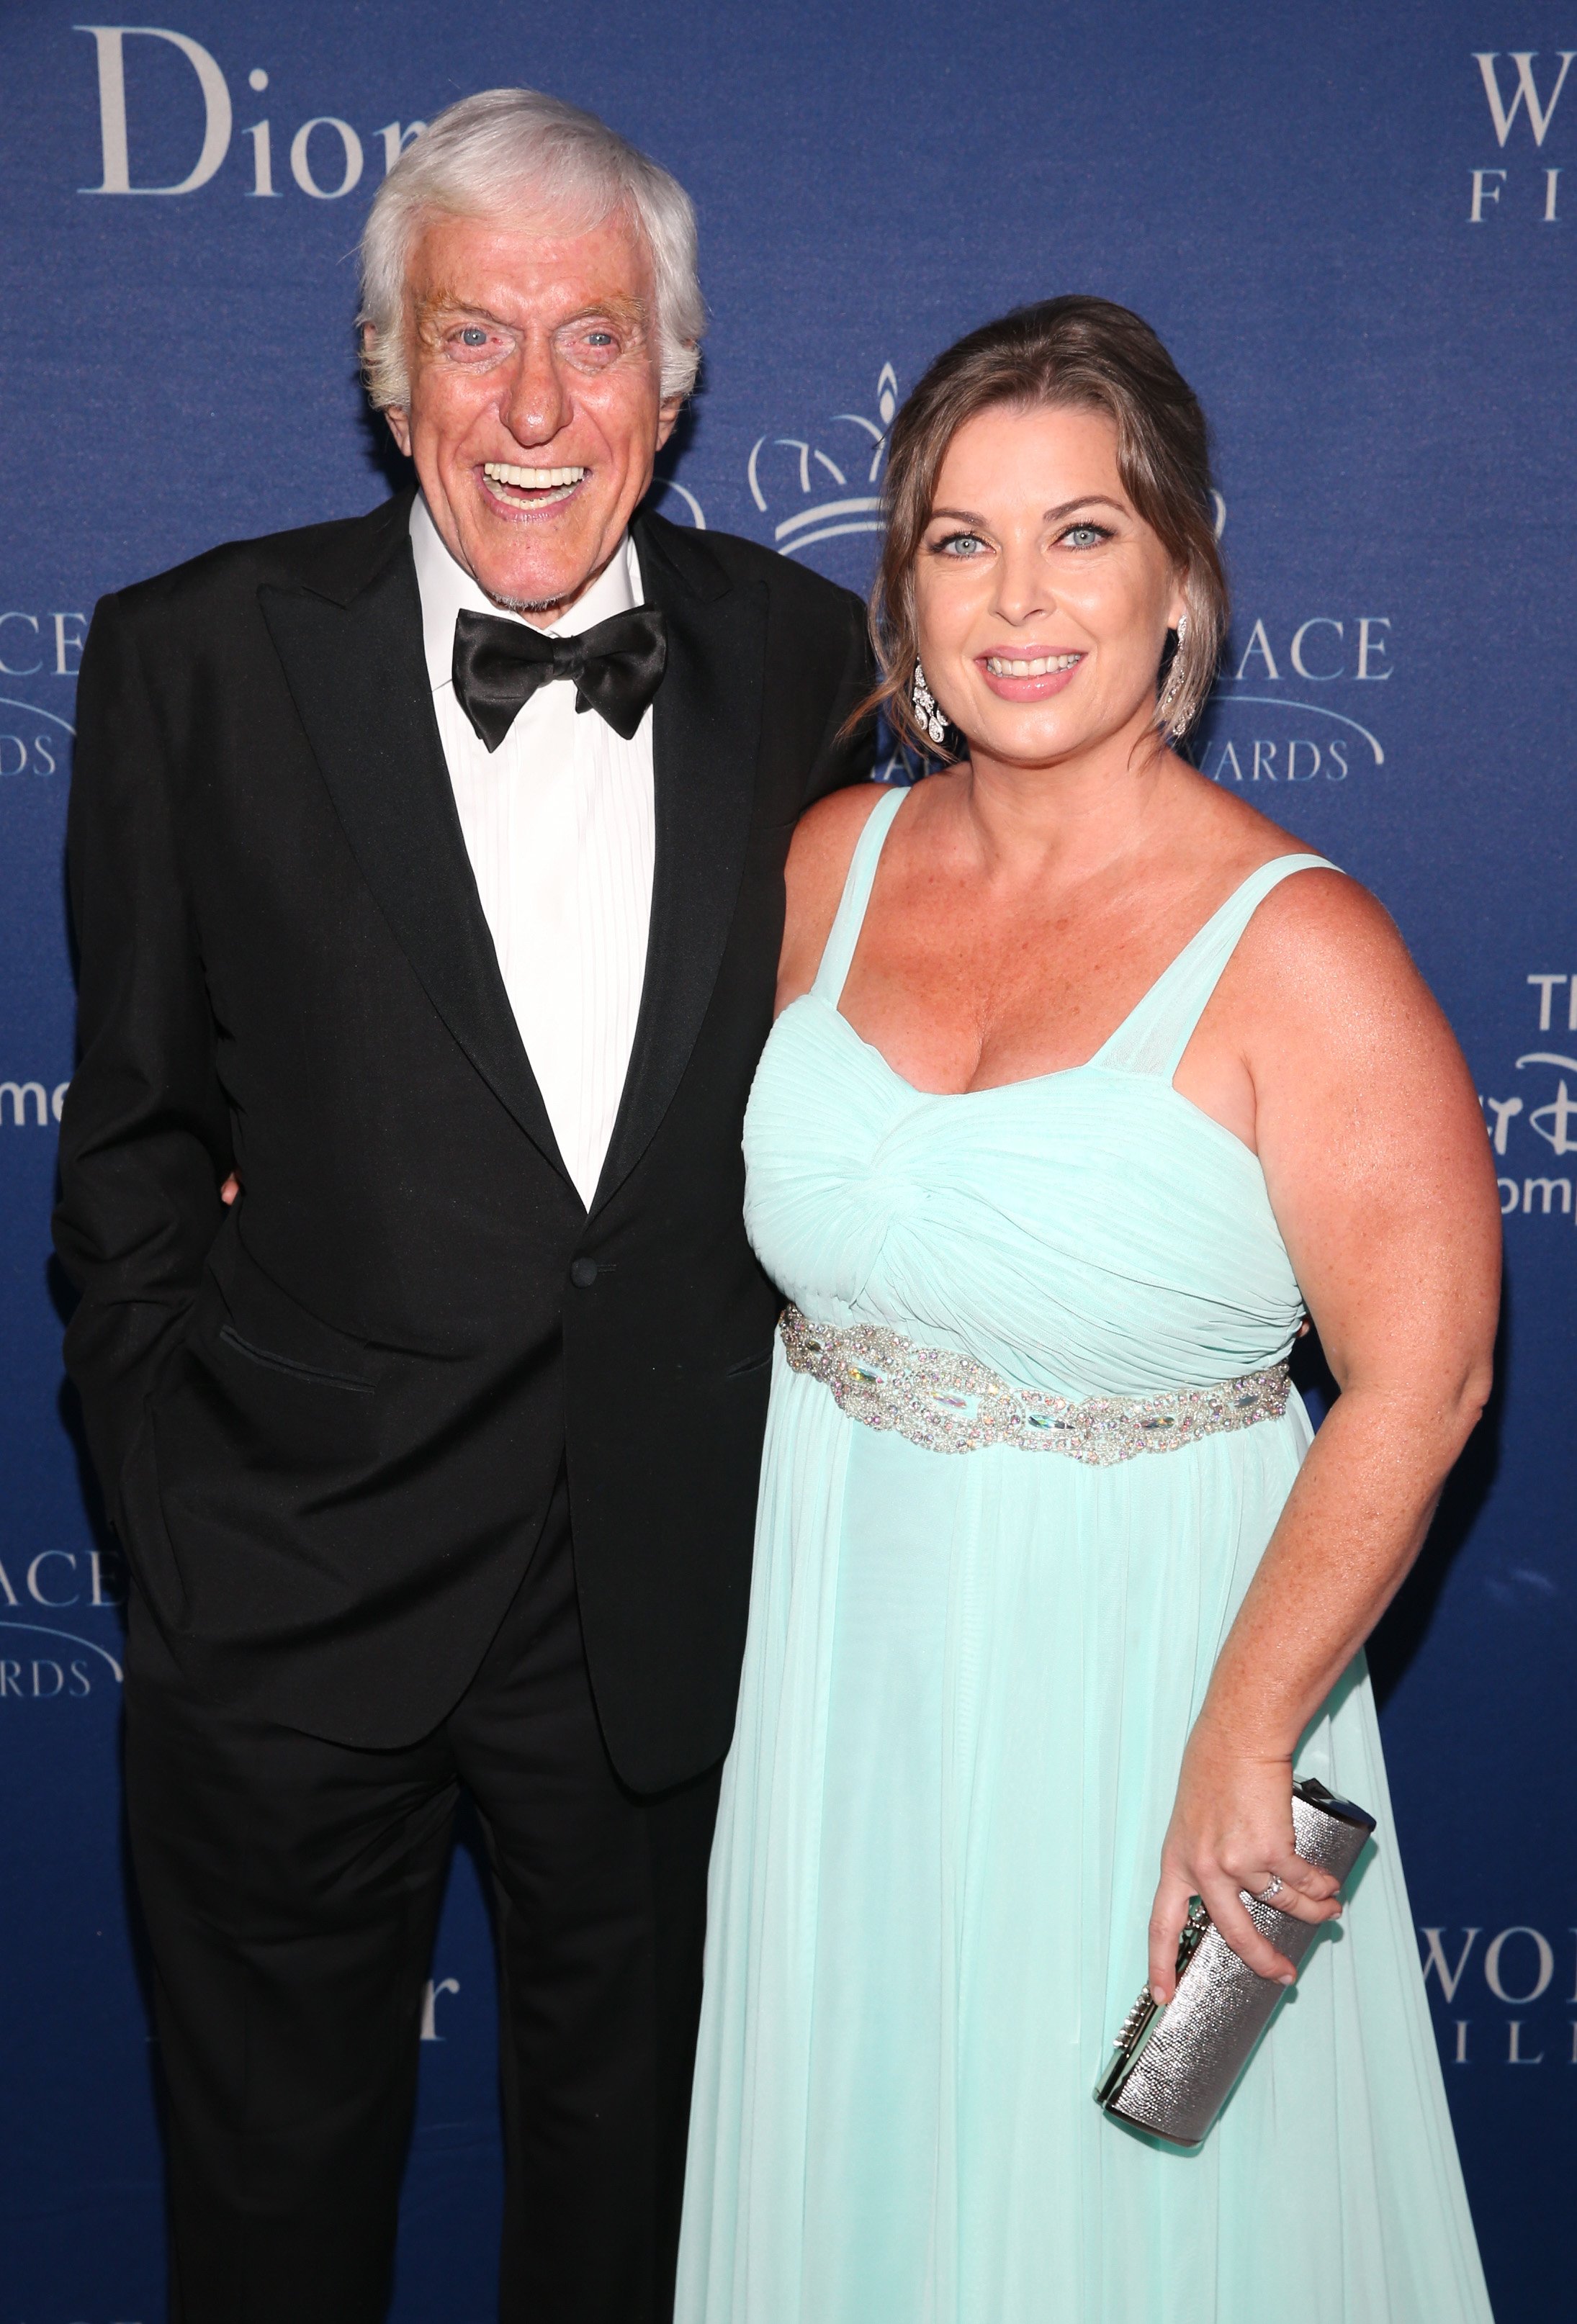 Dick Van Dyke and Arlene Silver attends the Princess Grace Awards Gala in Beverly Hills, California on October 8, 2014 | Photo: Getty Images